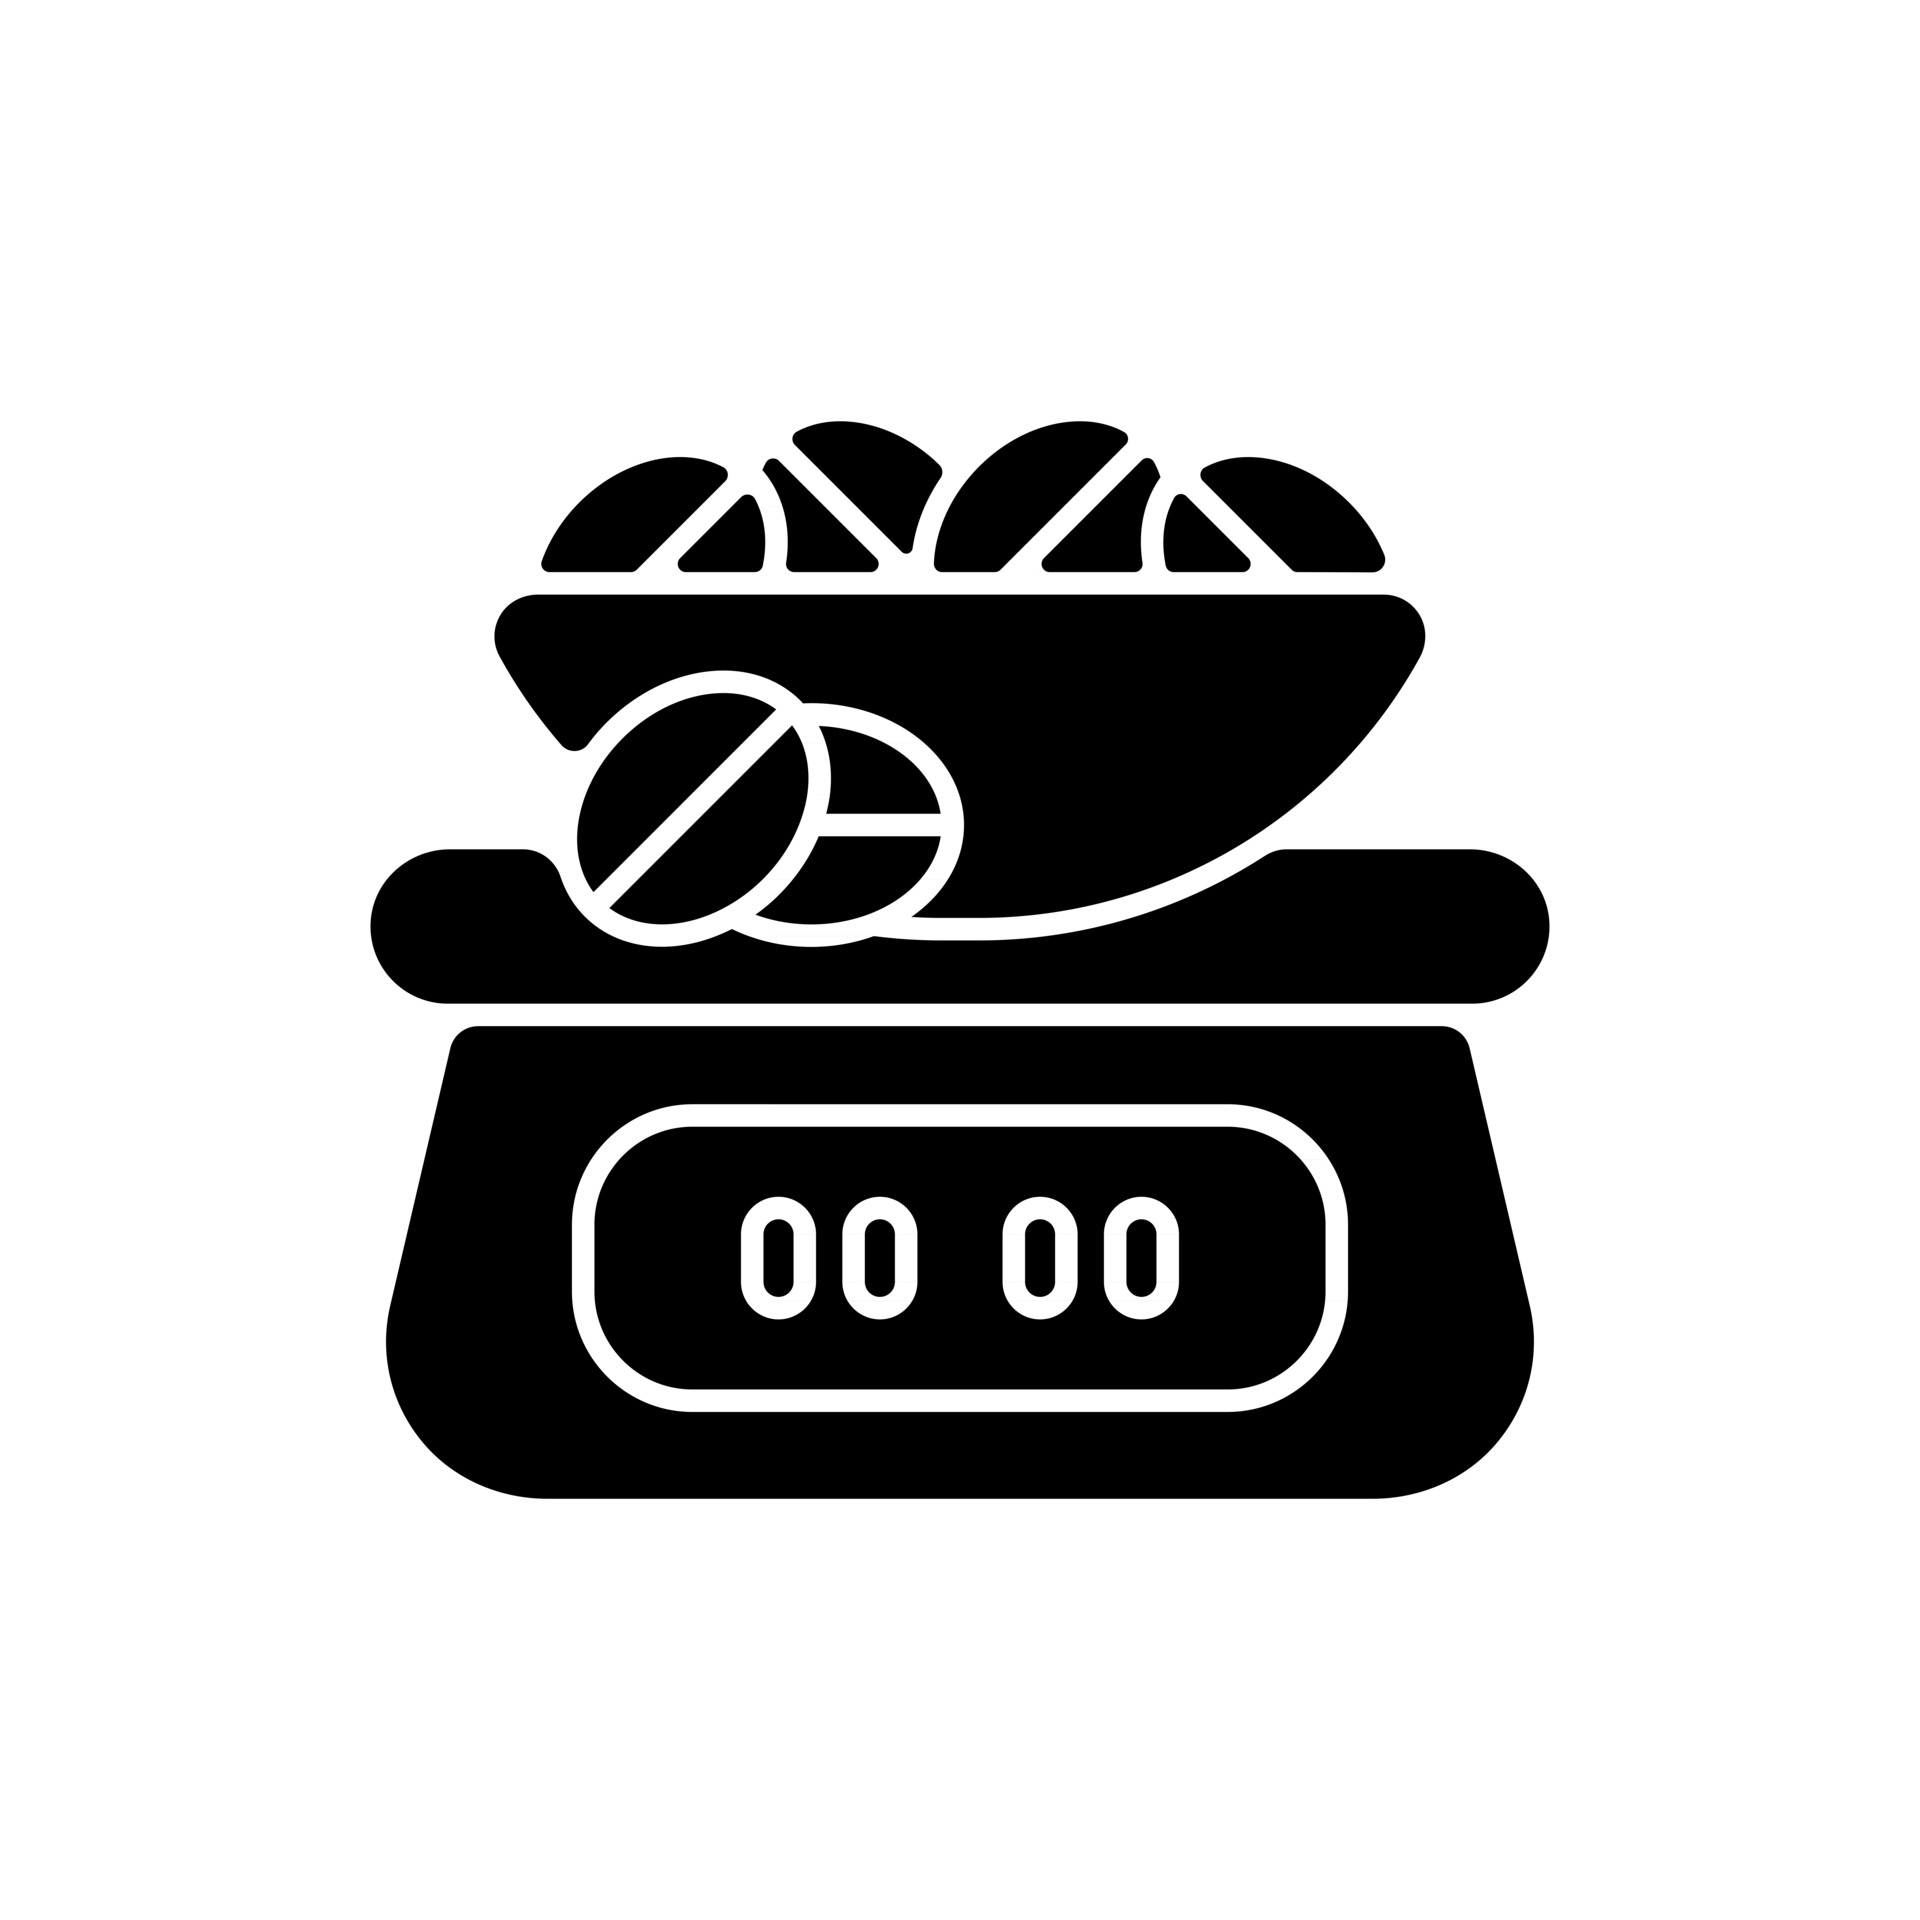 https://static.vecteezy.com/system/resources/previews/002/895/205/original/coffee-scale-black-glyph-icon-appliance-for-measuring-beans-weight-weighing-roasted-seeds-for-espresso-preparation-silhouette-symbol-on-white-space-isolated-illustration-vector.jpg